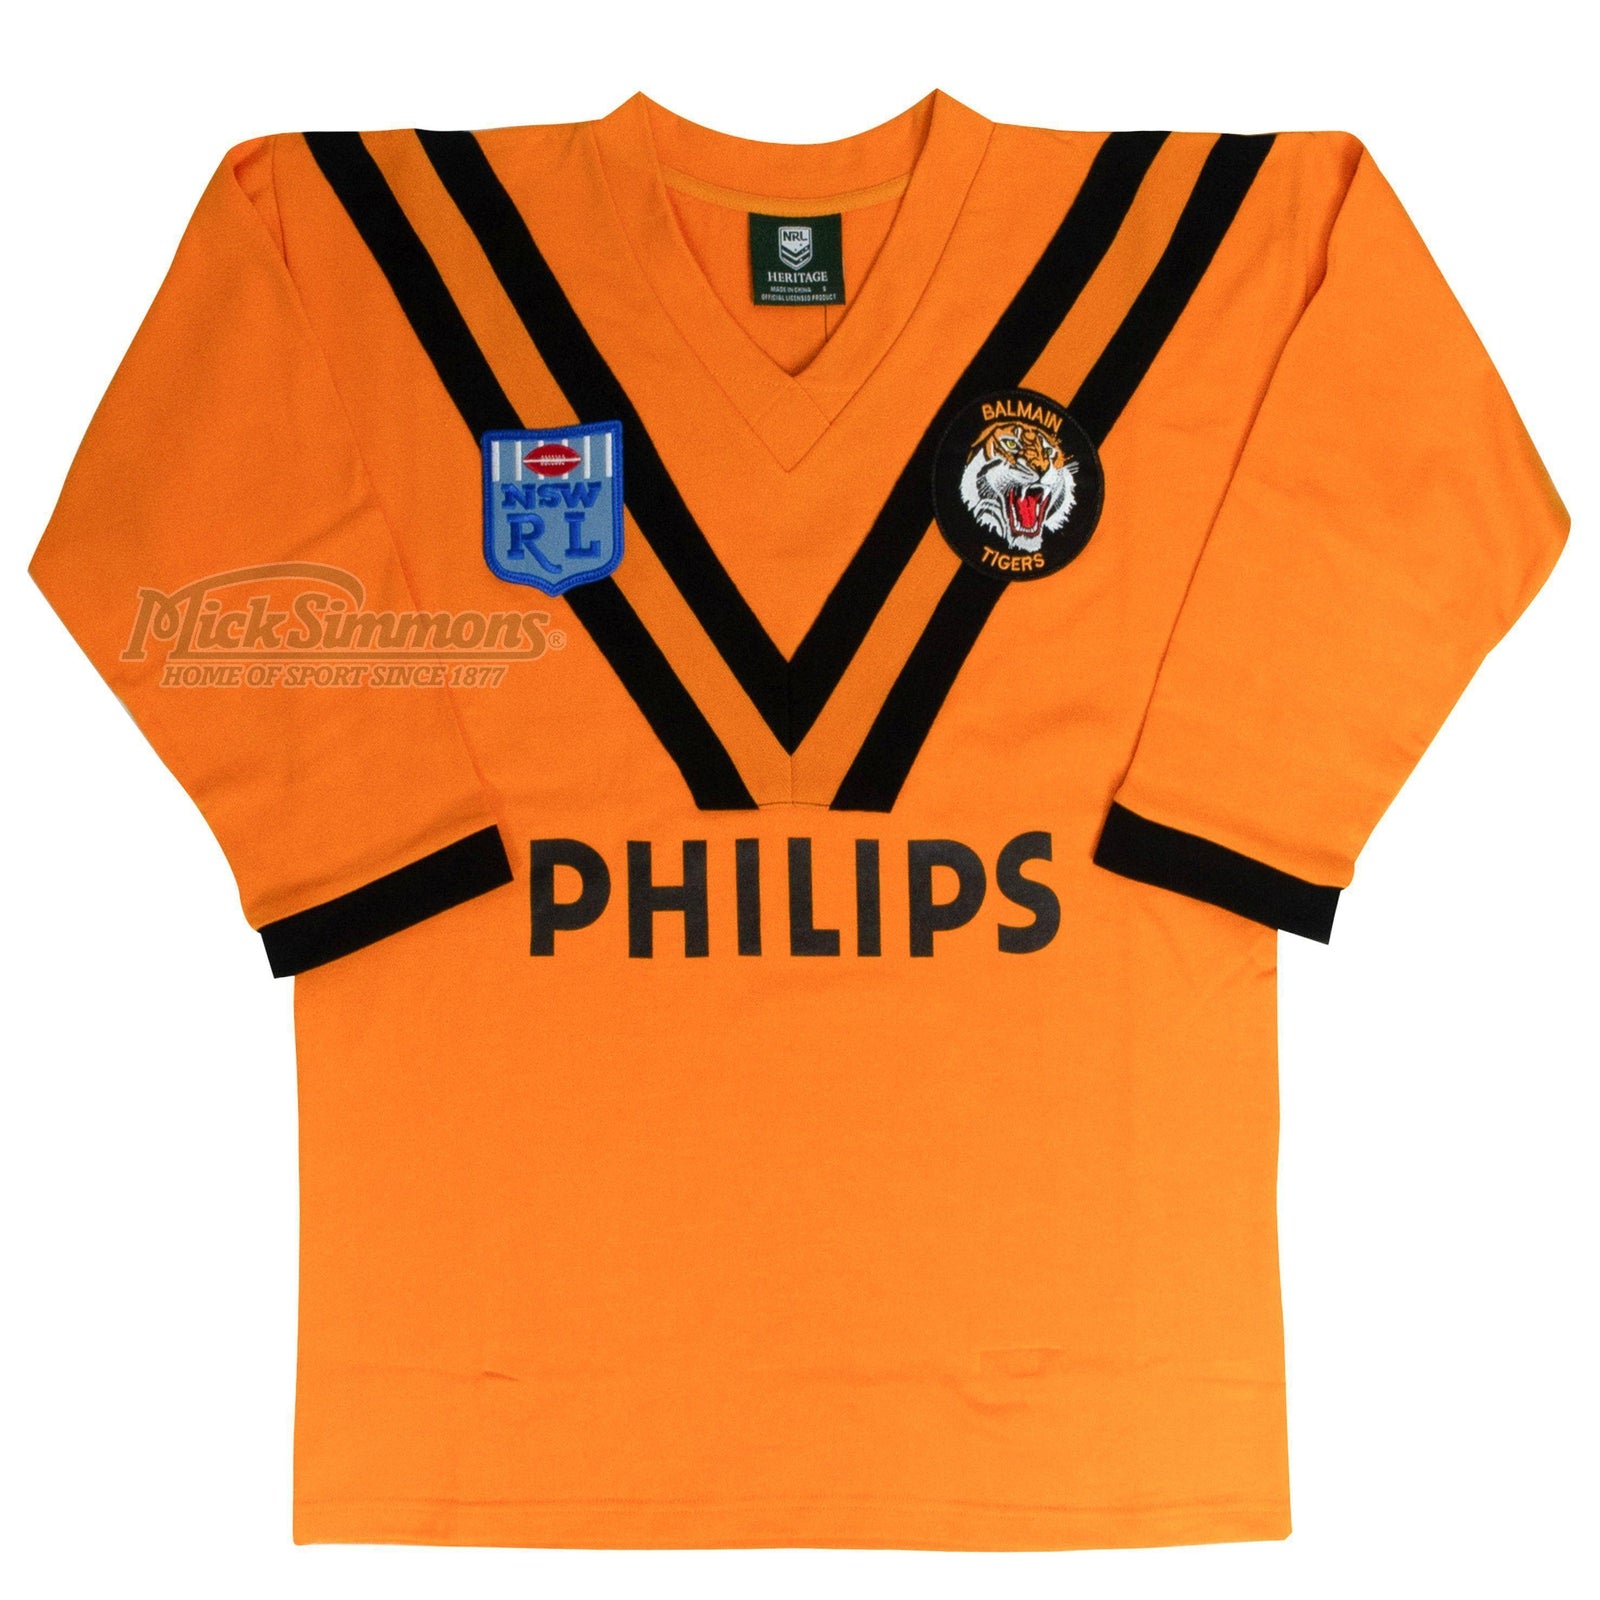 Tigers 1989 NRL Vintage Retro Heritage Rugby Jersey Guernsey | Mick Simmons Sport